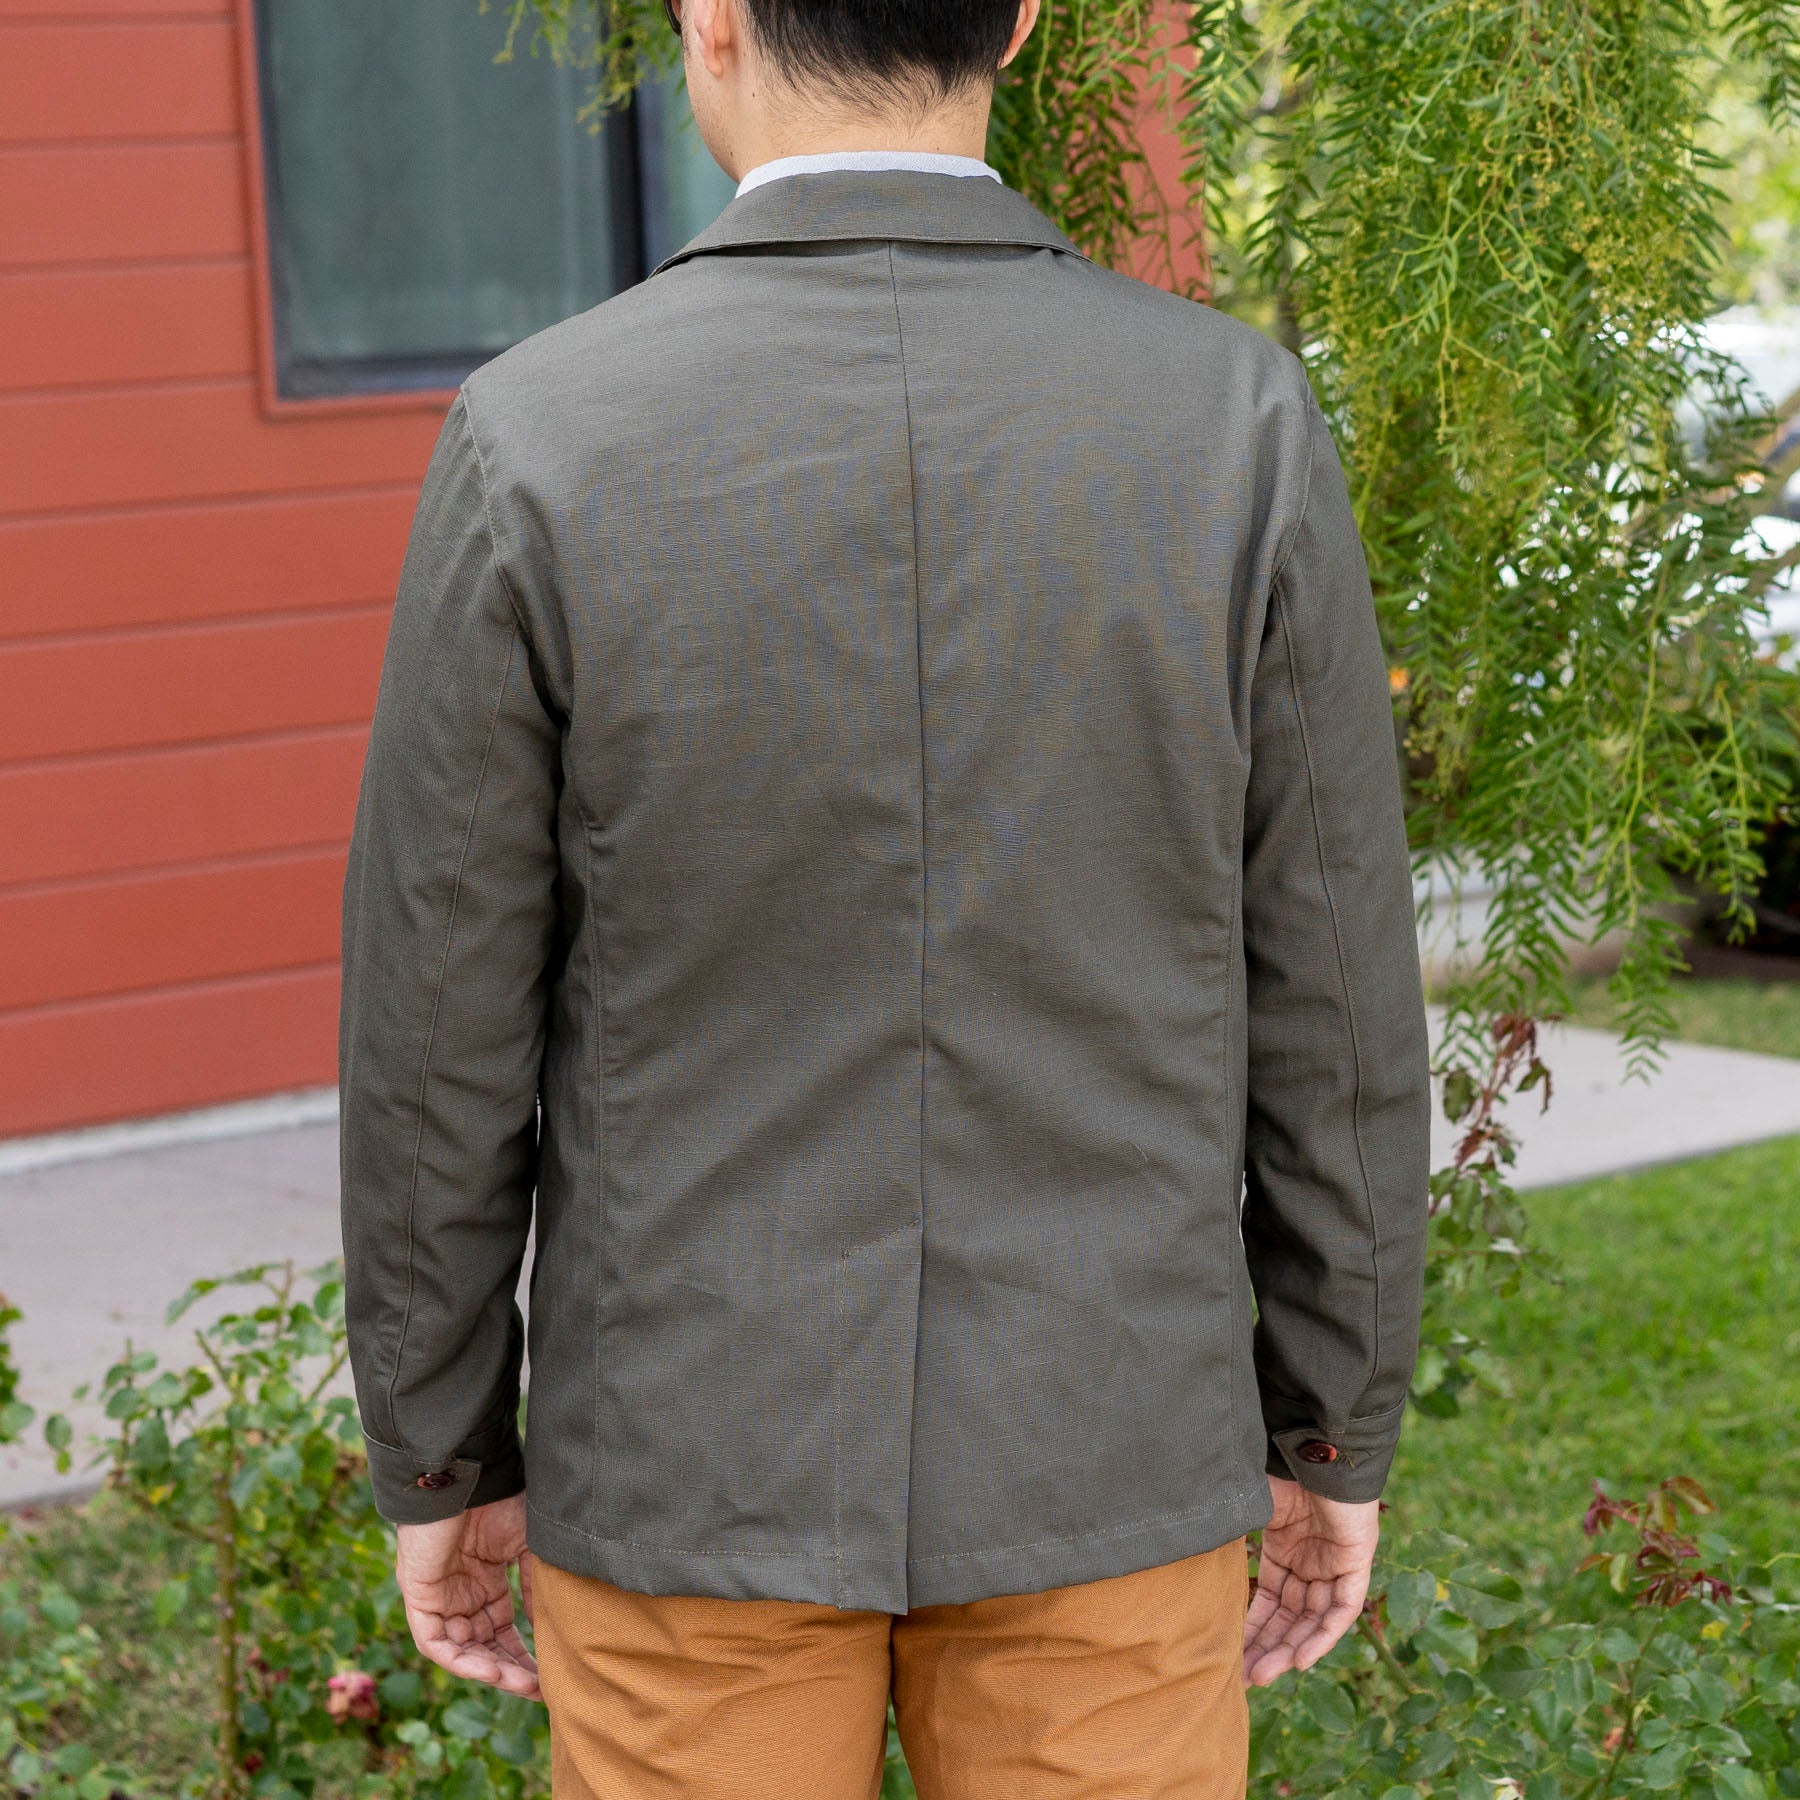 Doyle Jacket in Olive Military-Spec Cotton Ripstop Sz 38